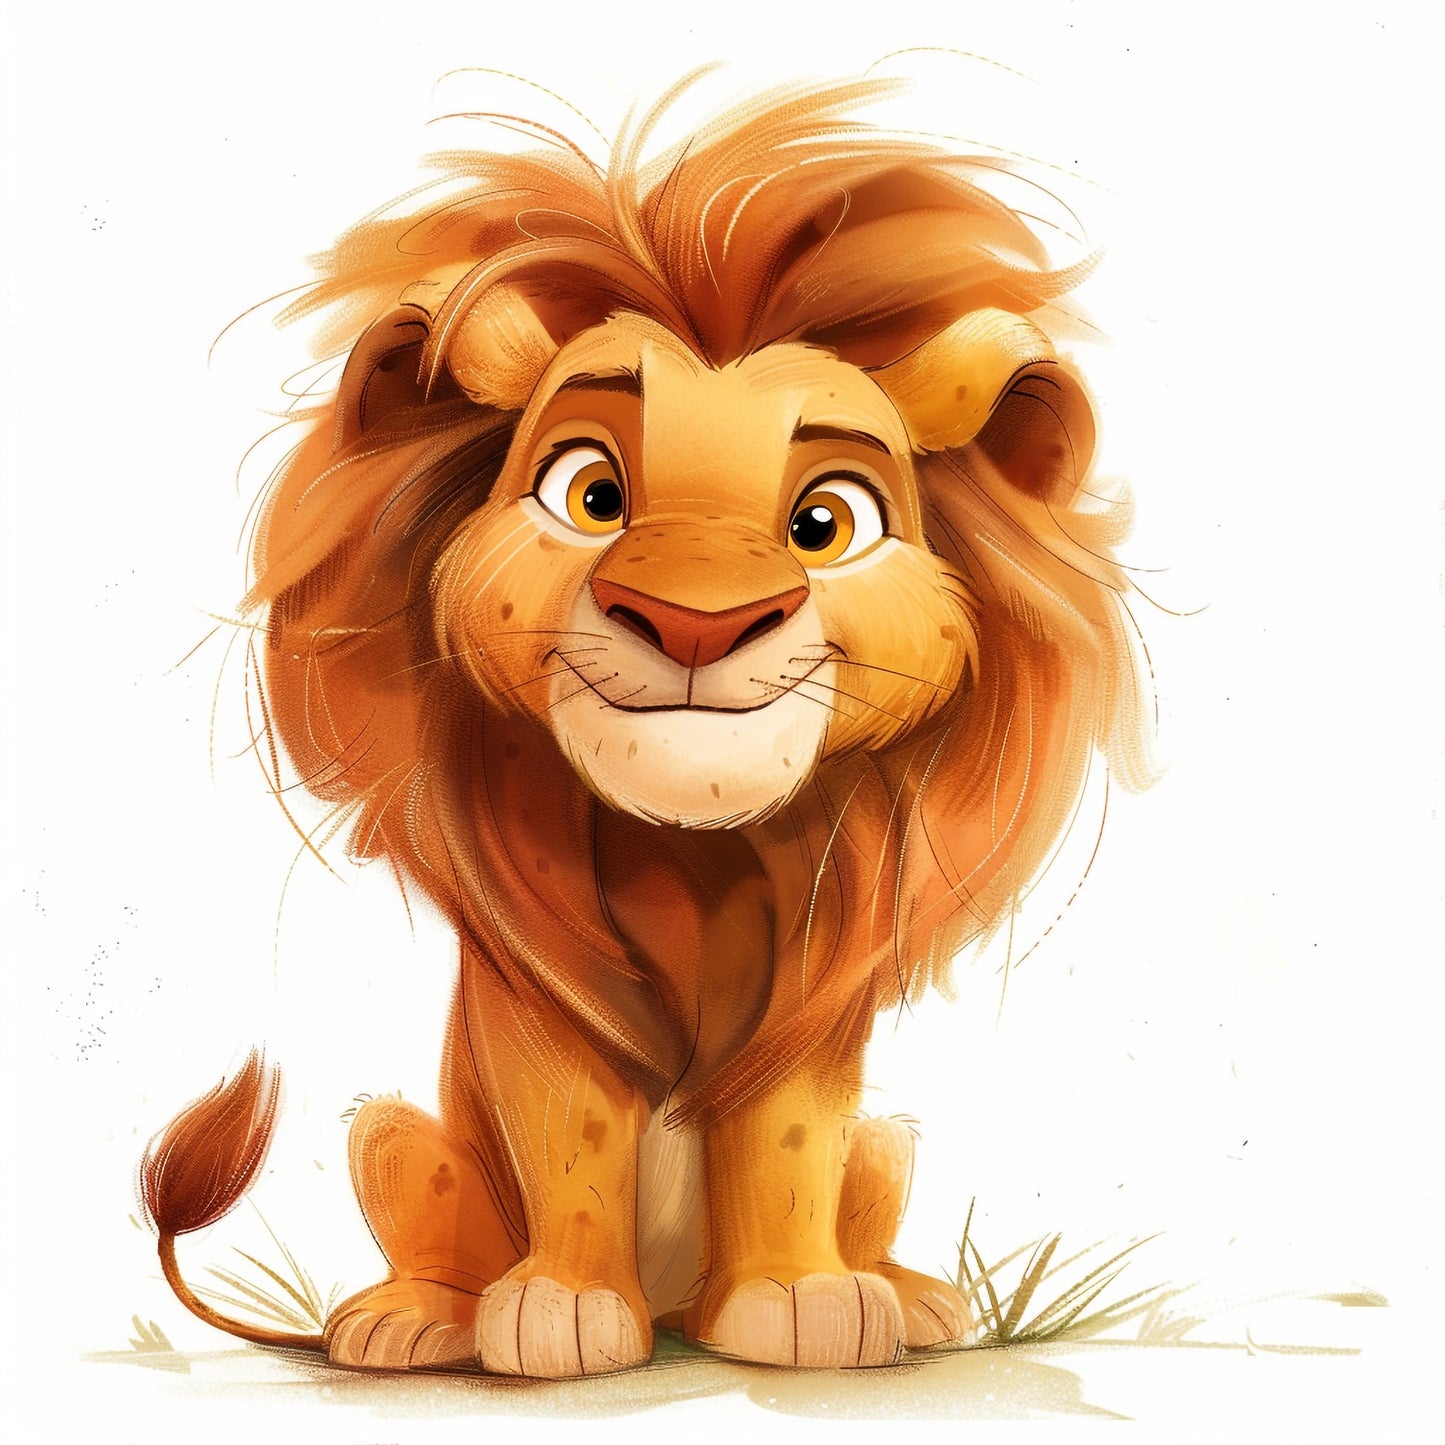 Adorable Illustrated Lion Sitting with a Friendly Smile